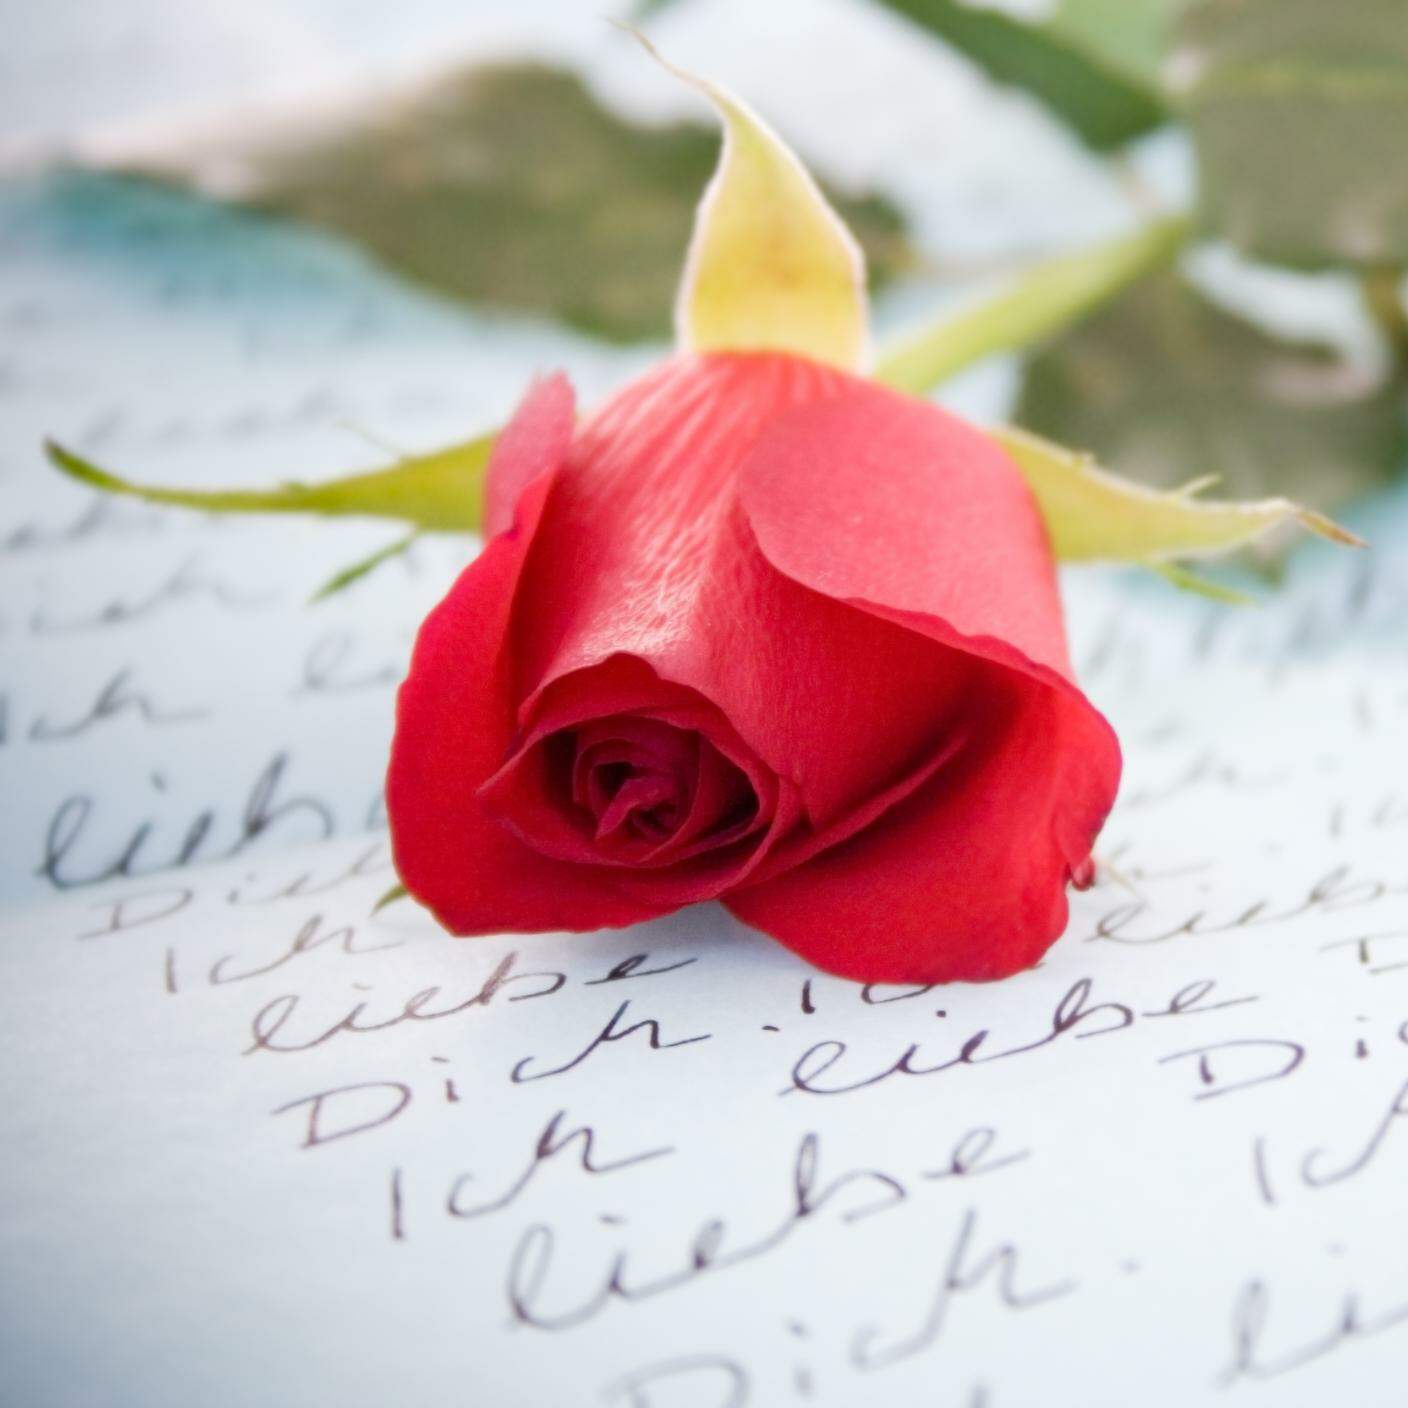 Lettera d'amore, rosa, poesia